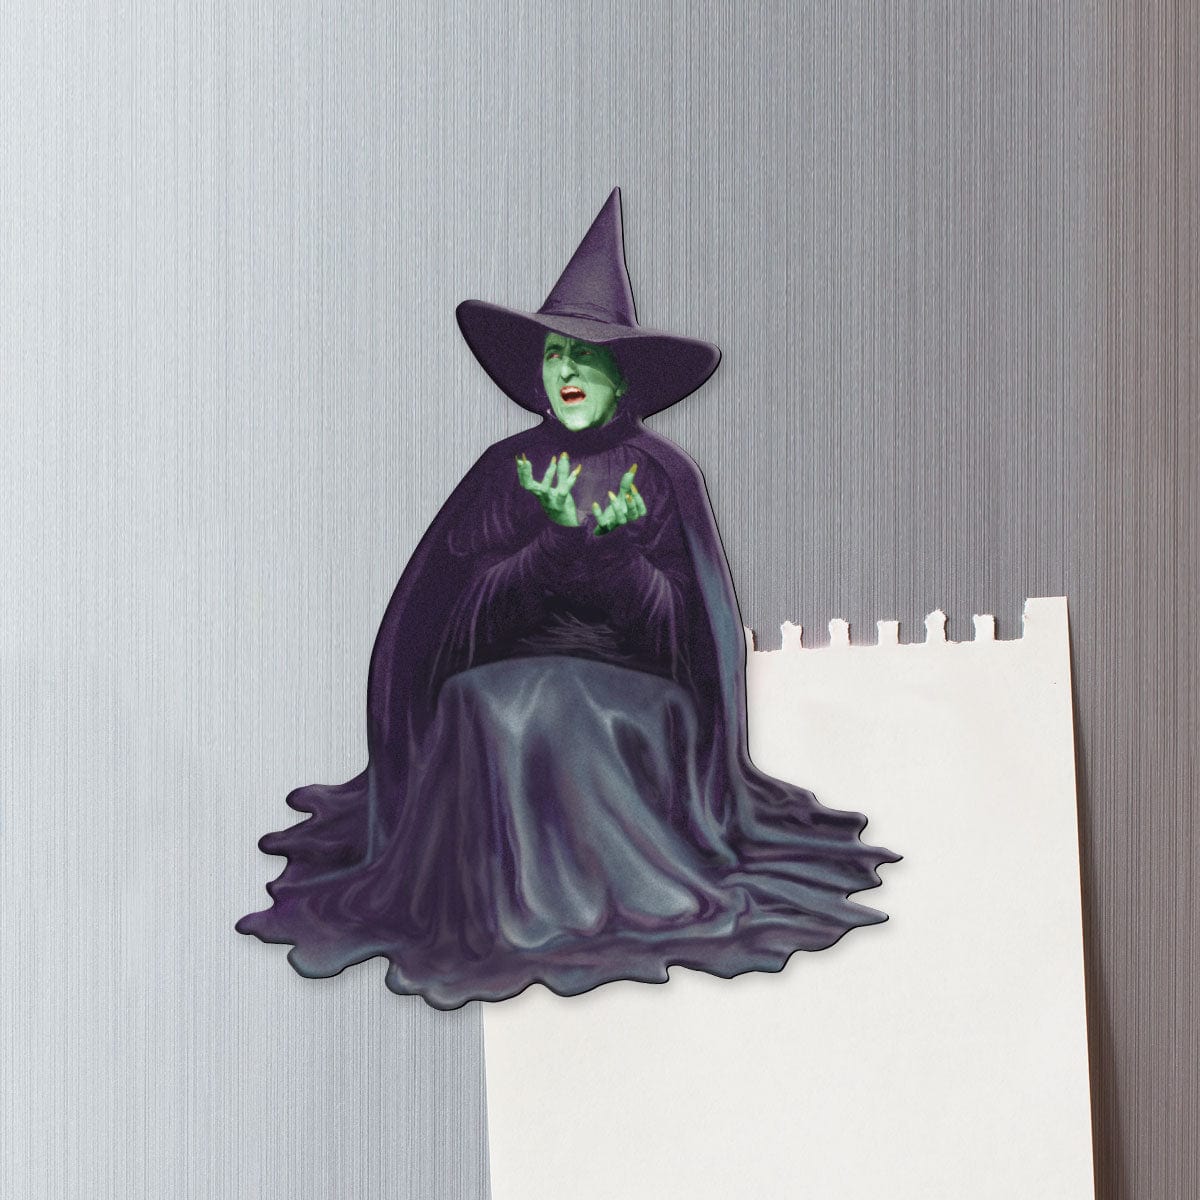 The Washi Tape Shop Halloween Scrapbooking Material Wicked Witch